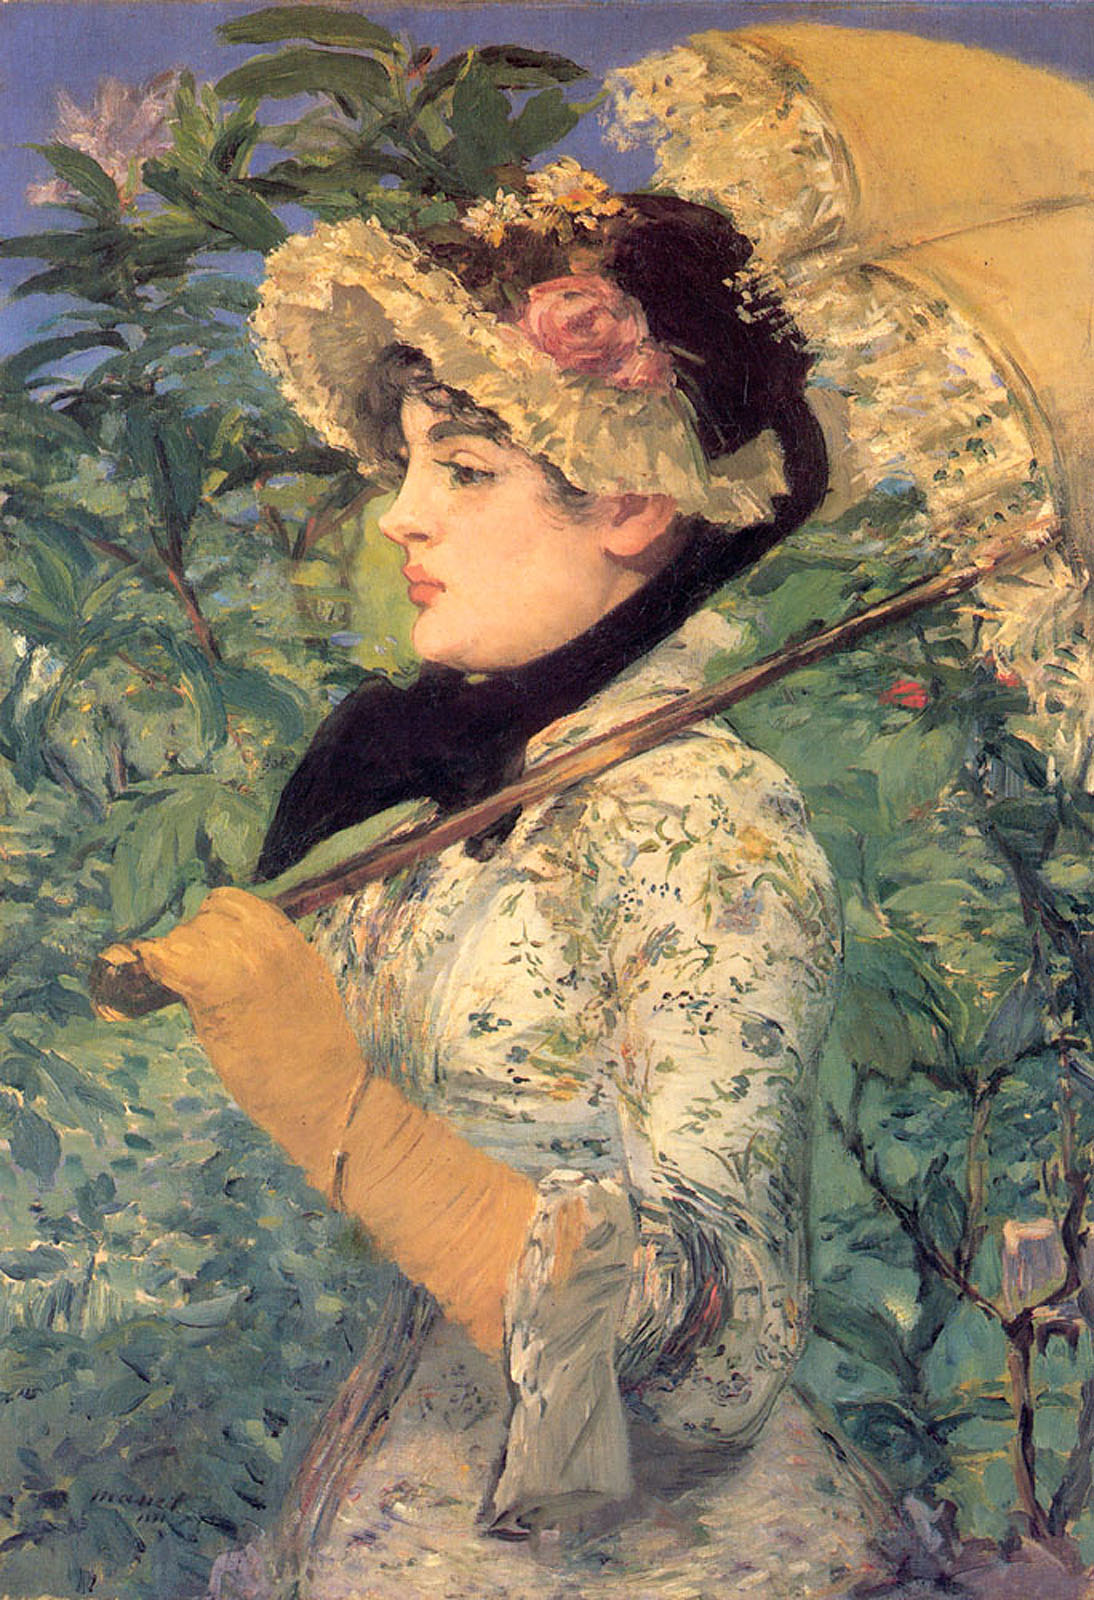 Spring (Study of Jeanne Demarsy) by Édouard Manet - 1882 - 15.5 x 10.7 cm Hermitage Museum